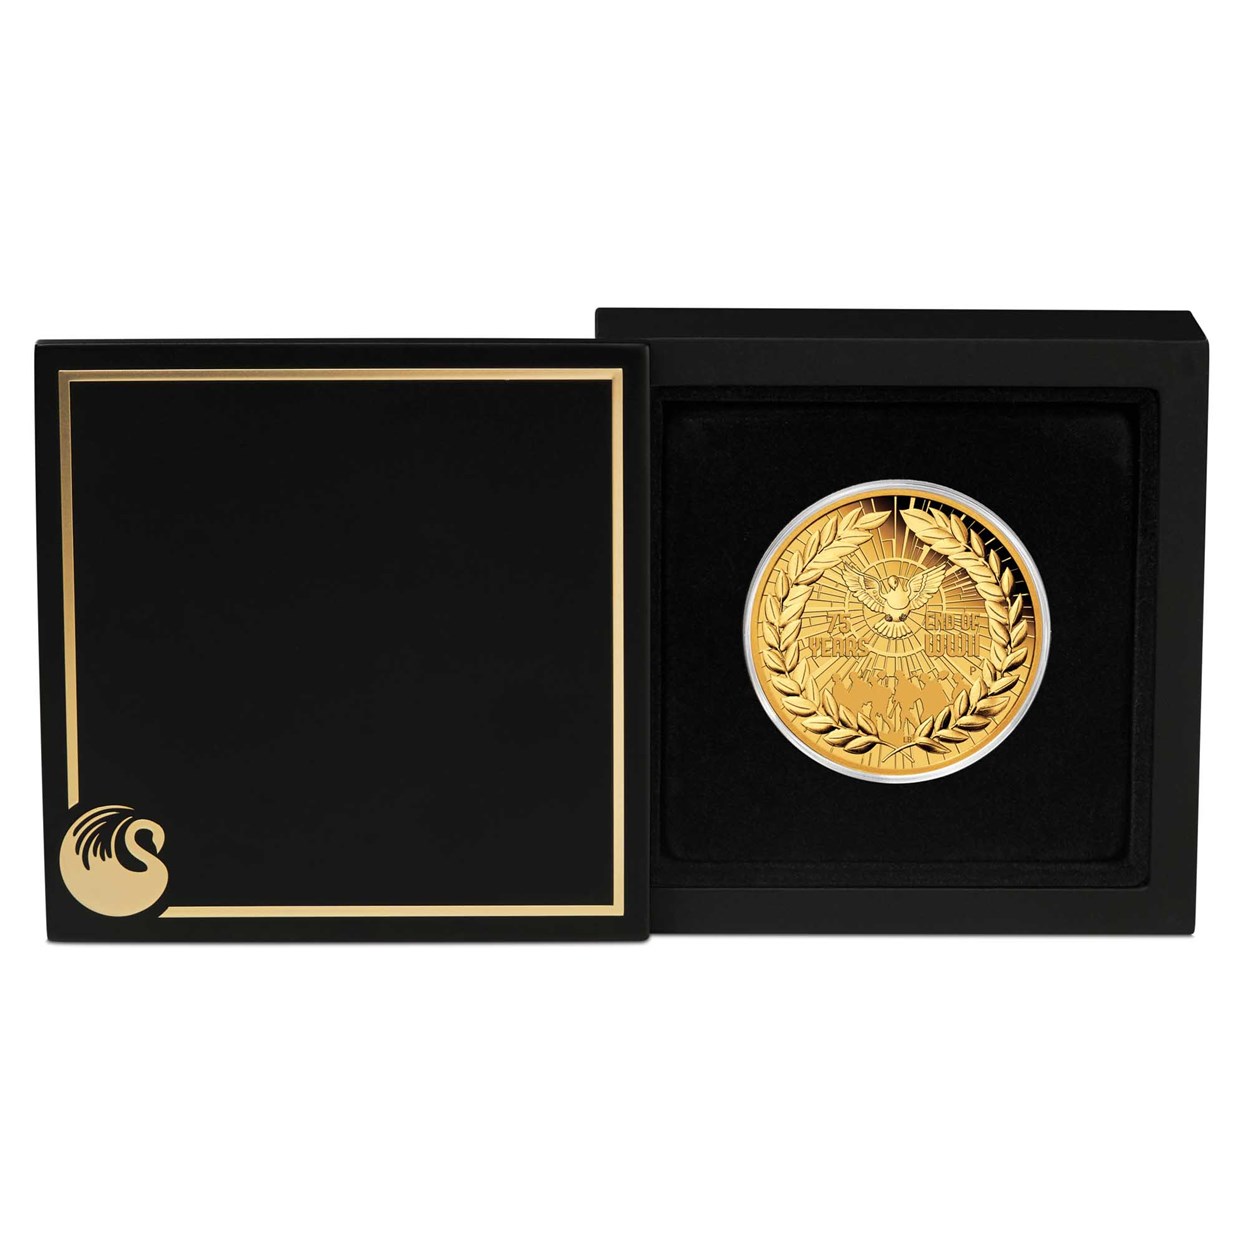 04 end of wwii 75th anniversary 2020 2oz gold proof InCase